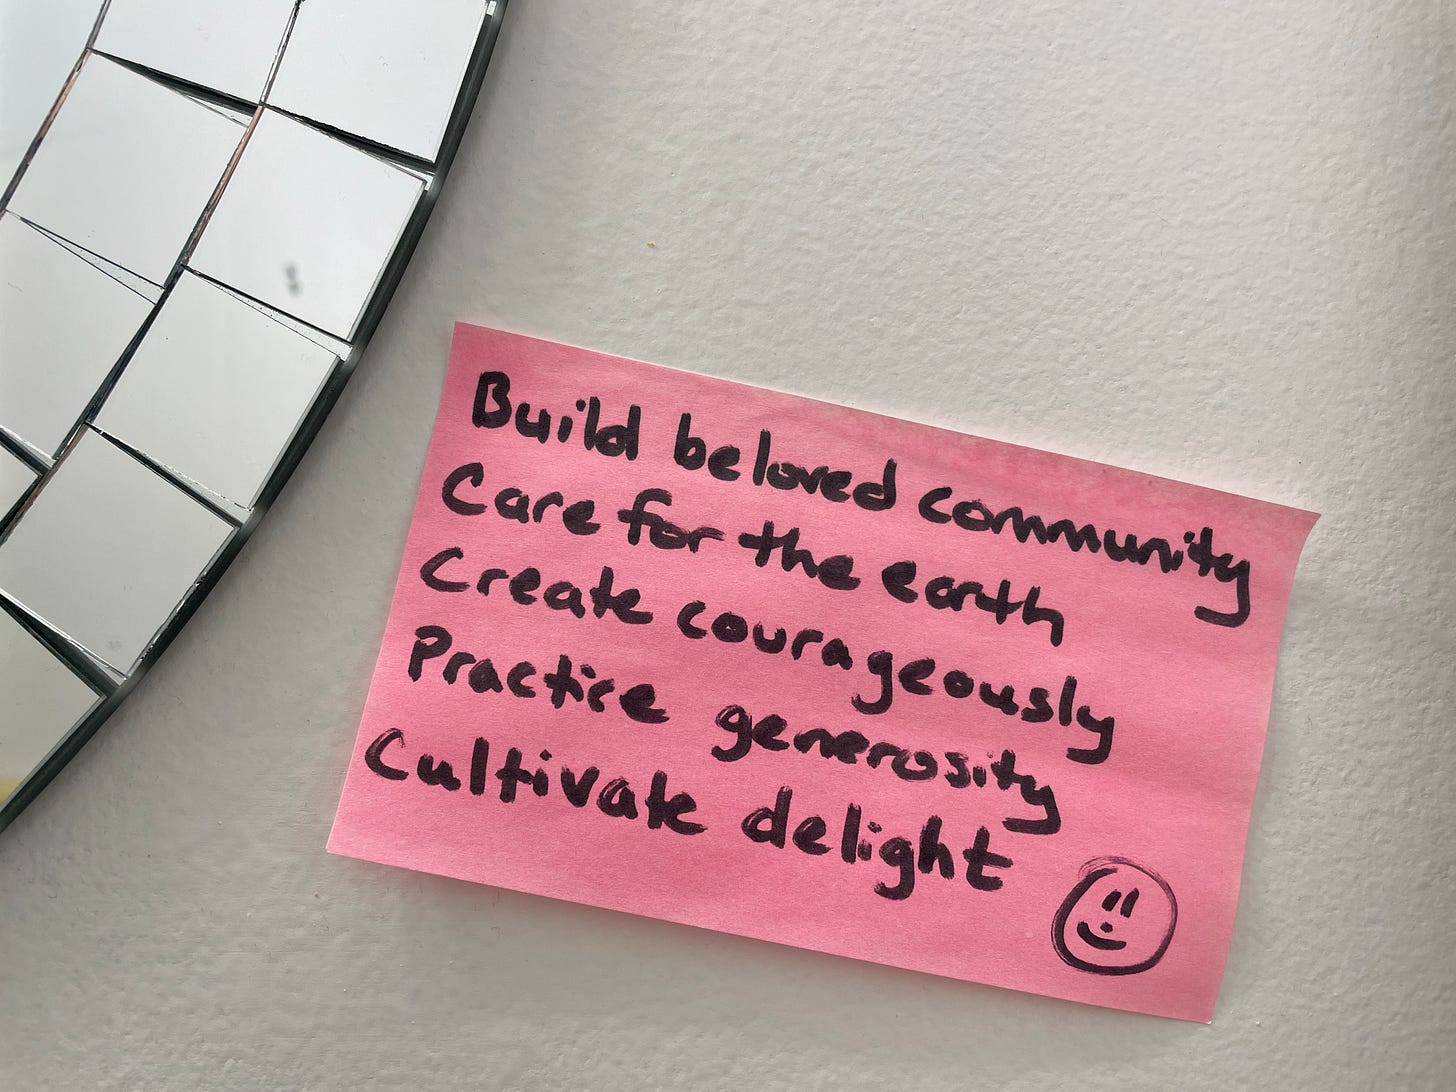 edge of curved mirror in upper right with white wall beside it. Pink sticky note. Written on it in black: Build beloved community, Care for the earth, Create courageously, Practice generosity, Cultivate delight.